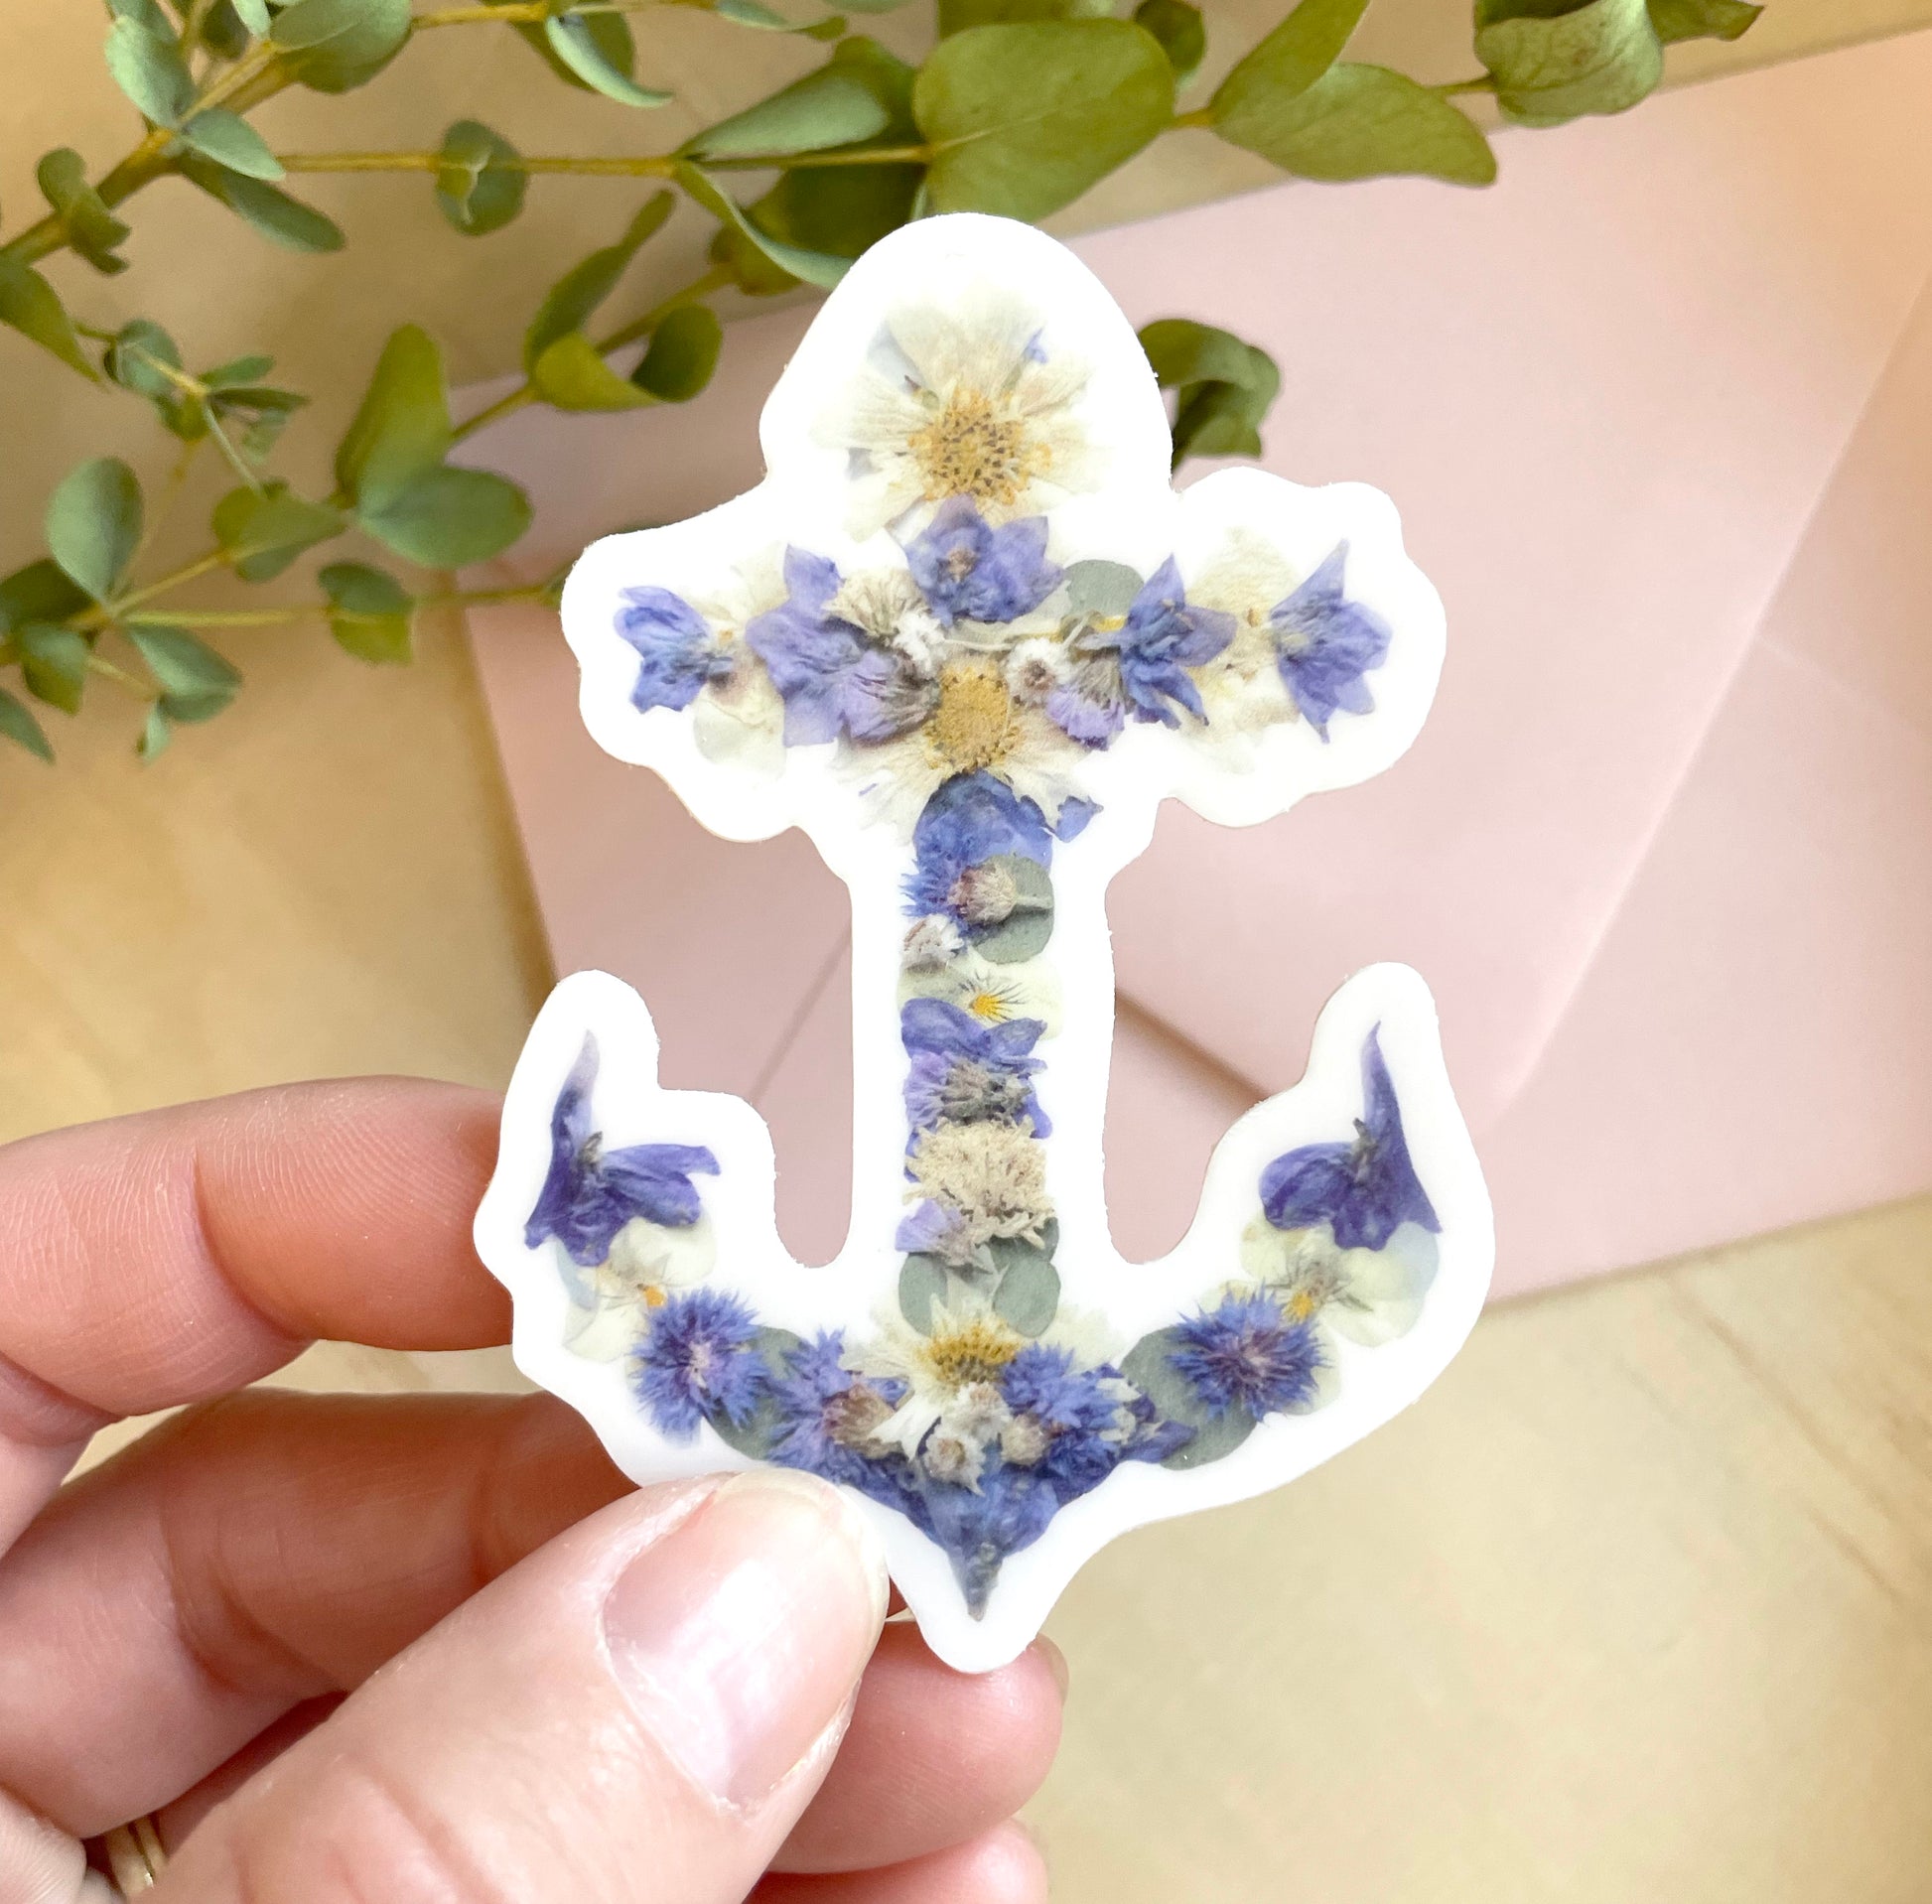 sticker of floral anchor artwork made from blue and white pressed flowers. 